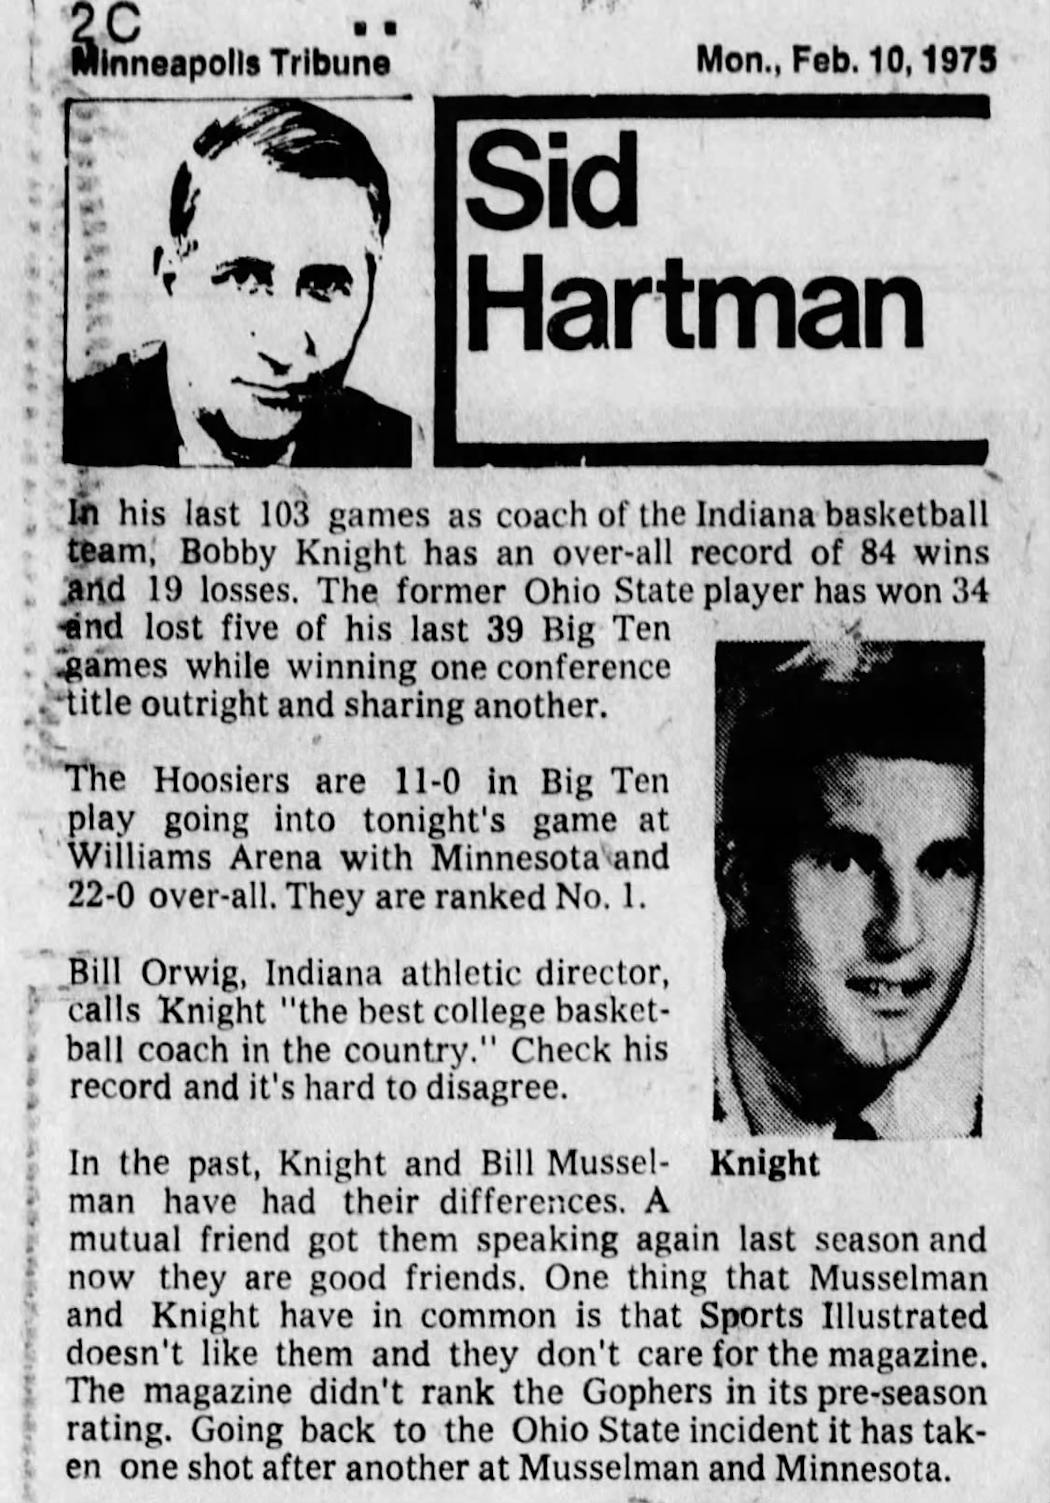 Sid Hartman regularly featured Bobby Knight in his columns dating back to the 1960s.